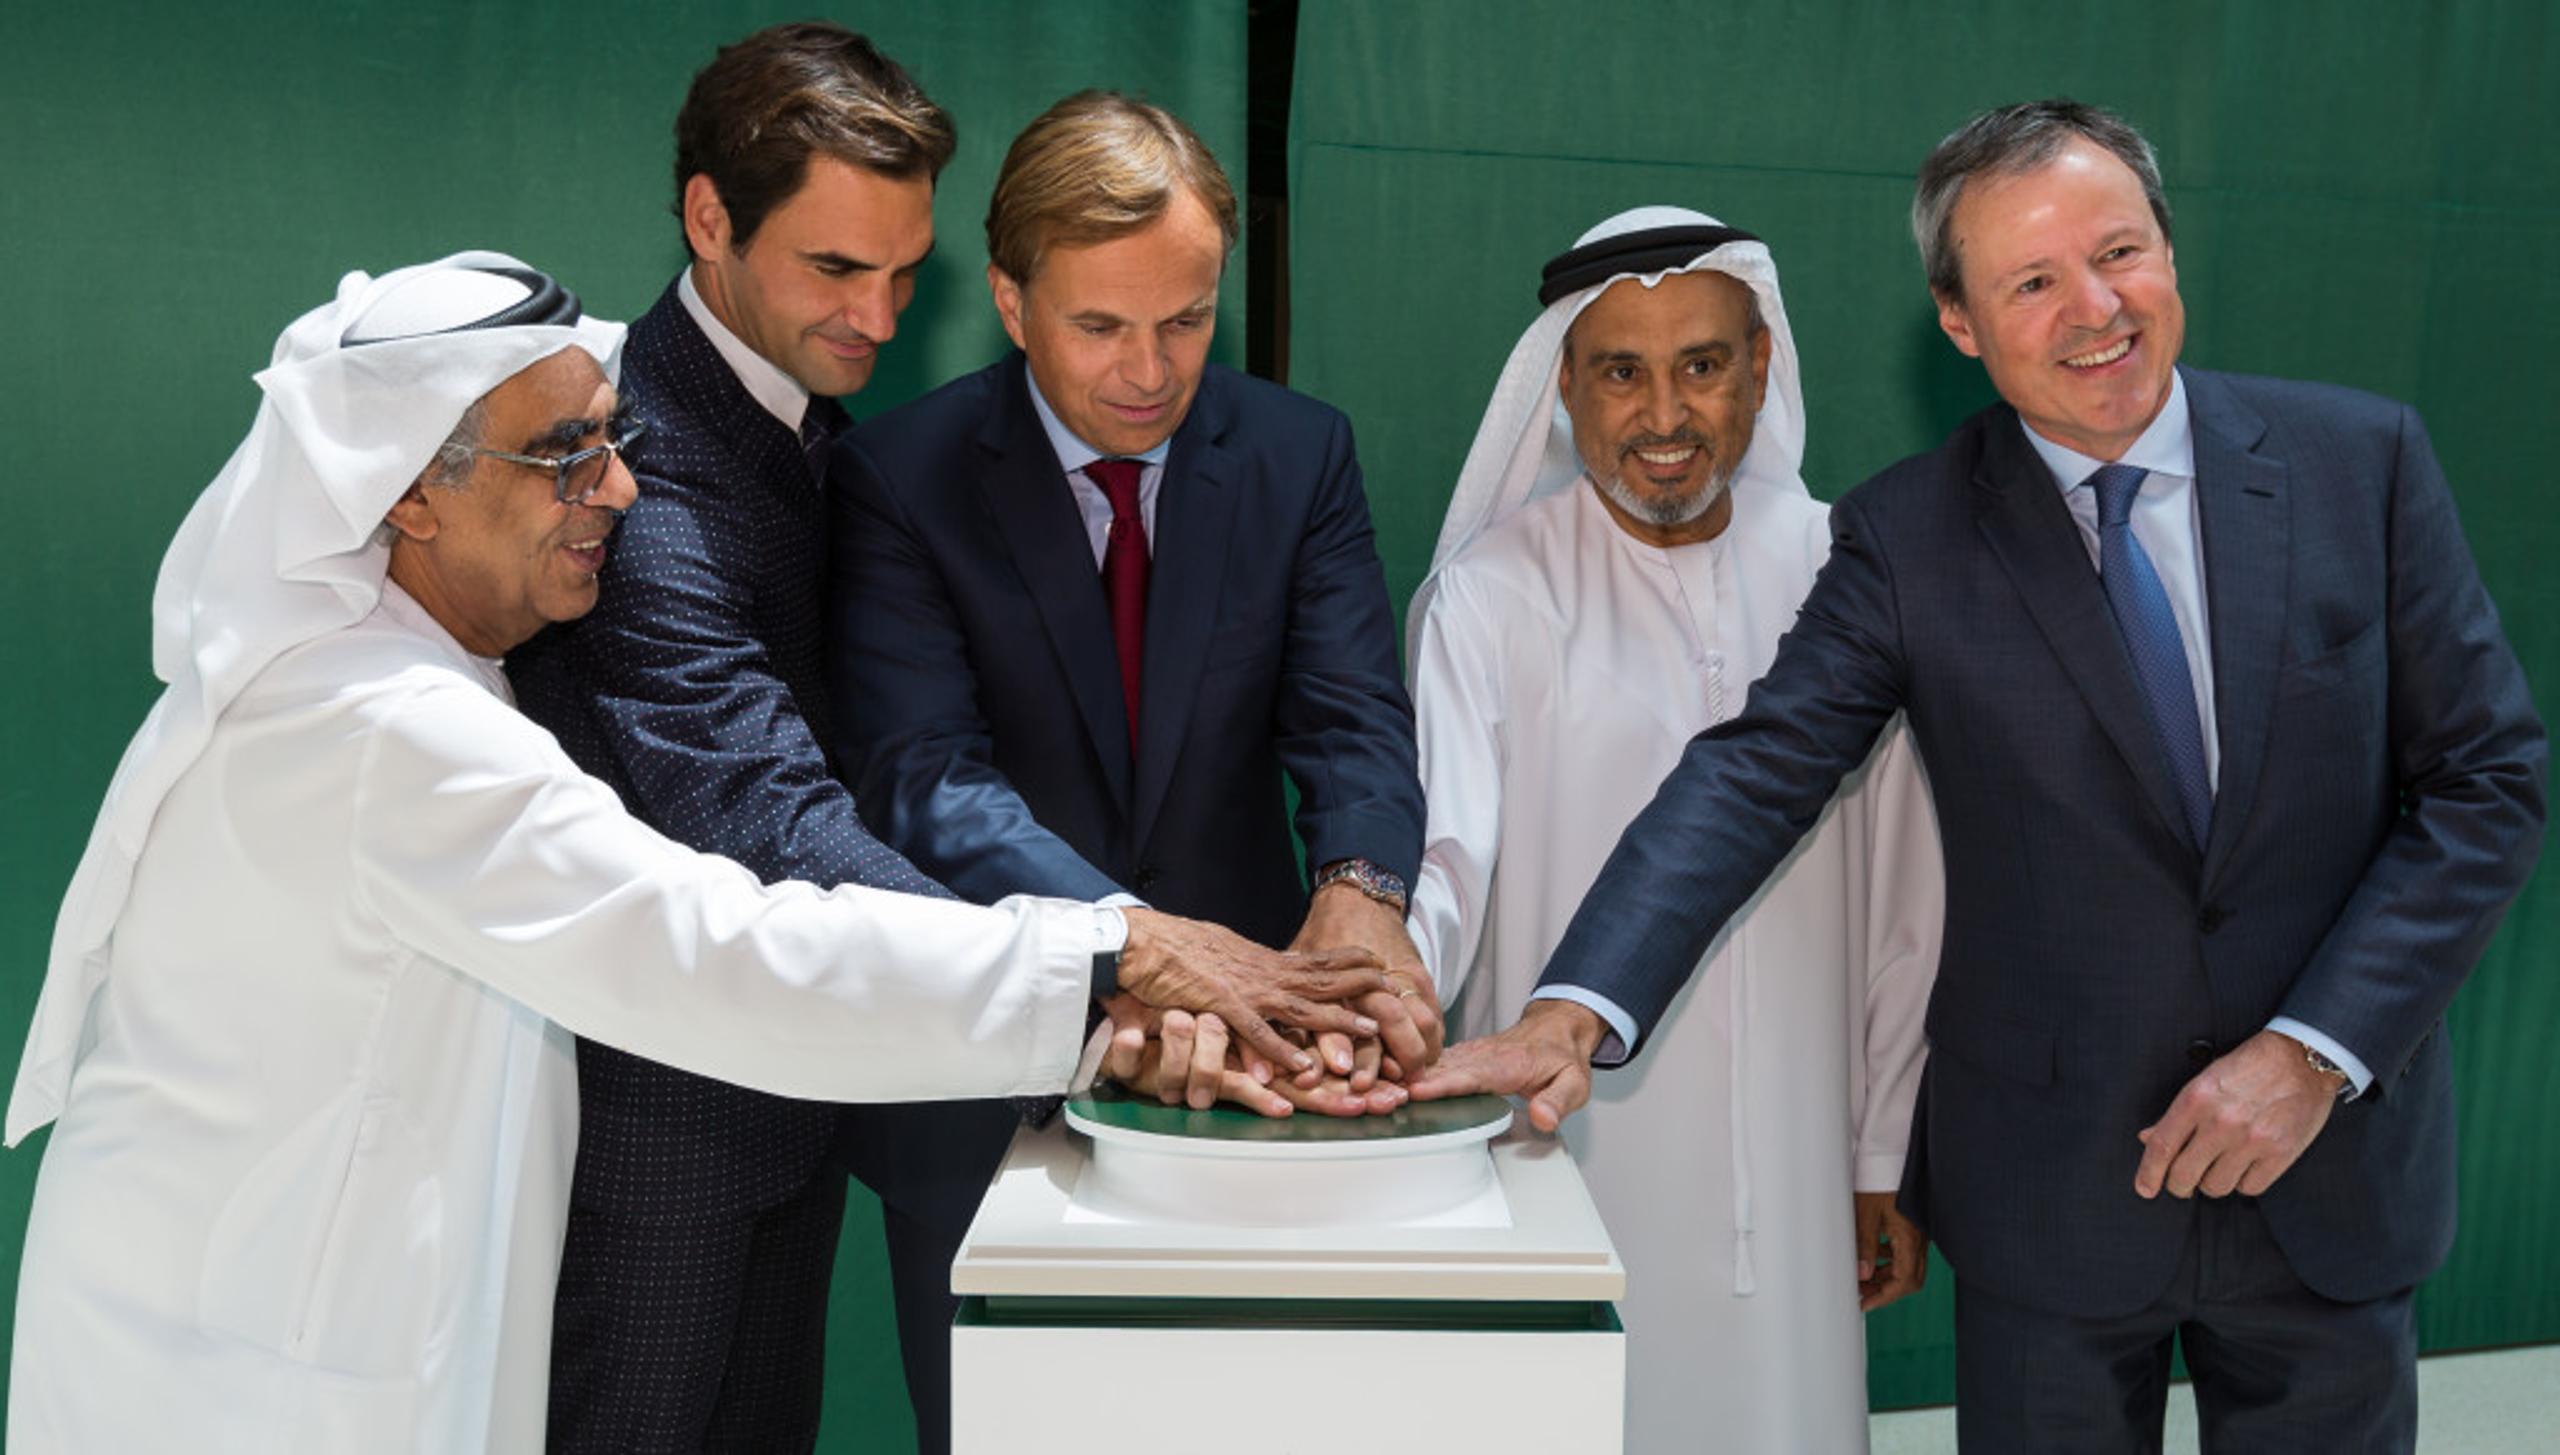 Roger Federer, Jean-Frédéric Dufour, CEO of Rolex, Abdul Hamied Ahmed Seddiqi, Vice Chairman of Seddiqi Holding, and other representatives at the launch.